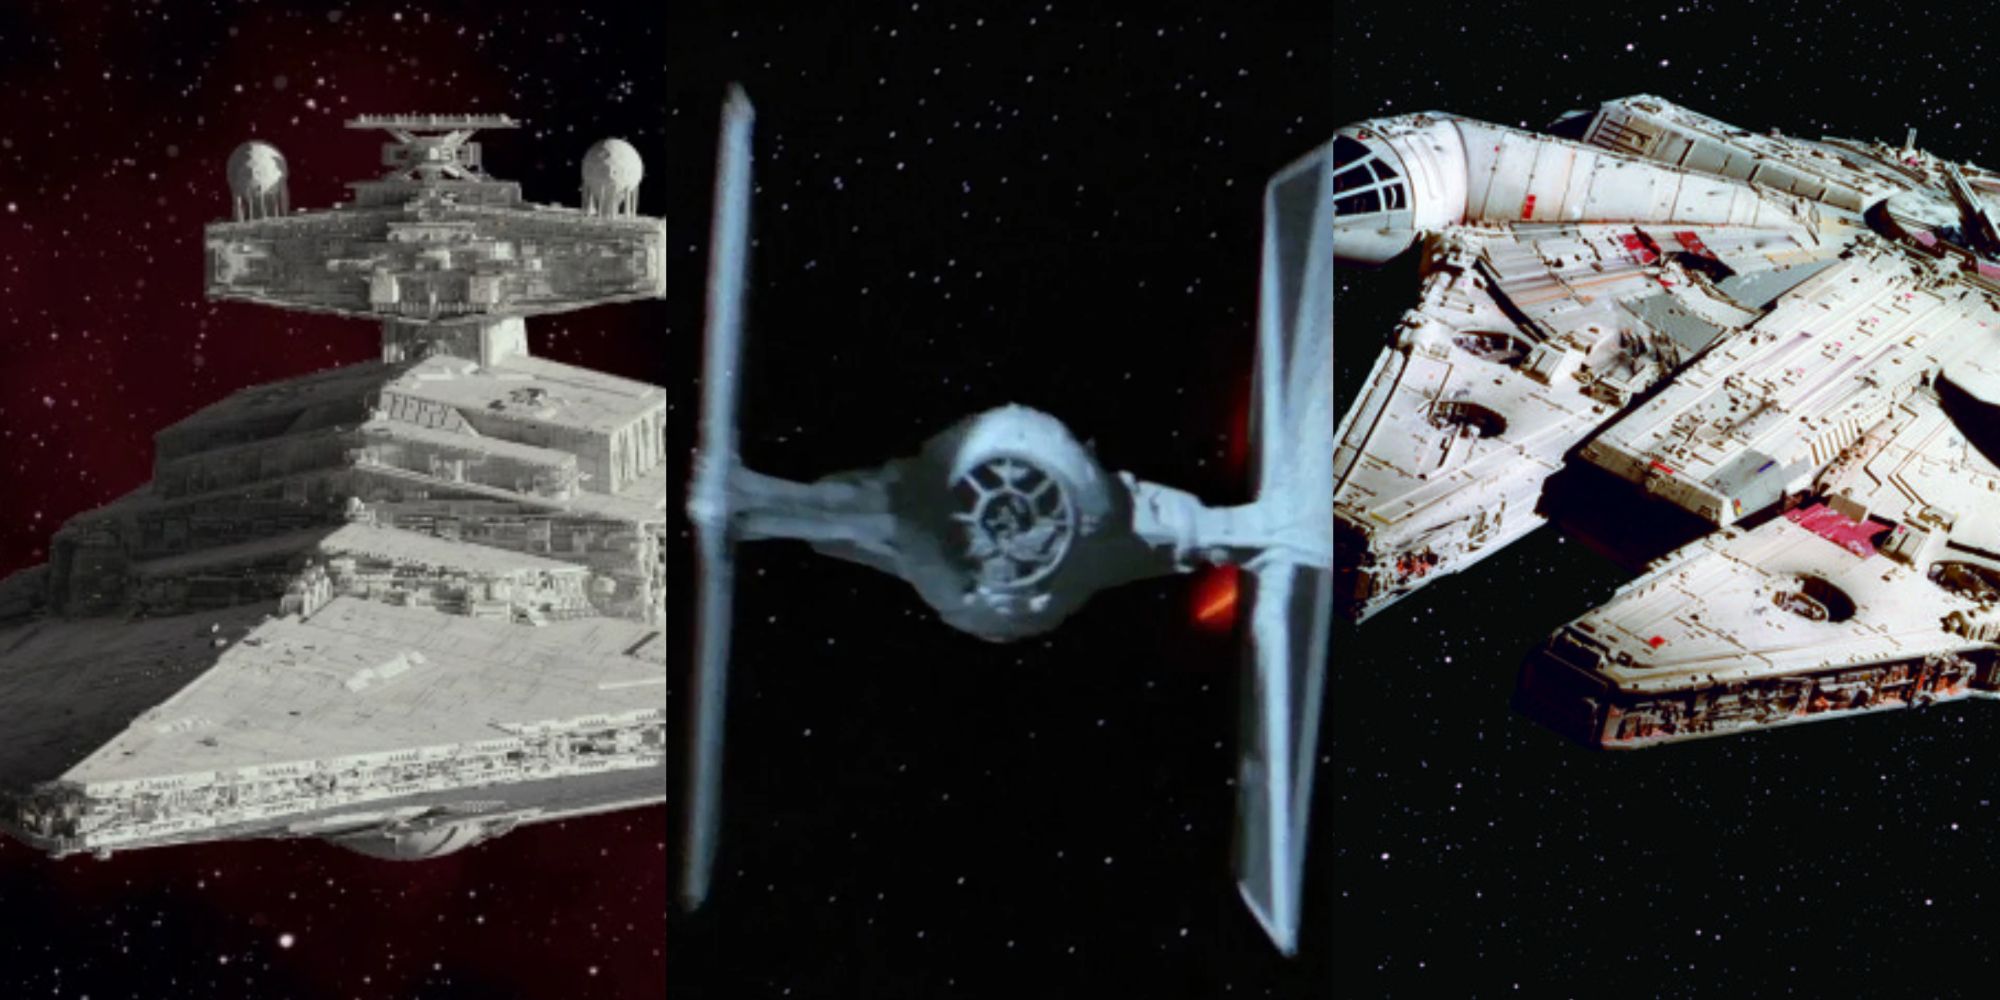 Star Wars': The Most Iconic Ships From the Original Trilogy